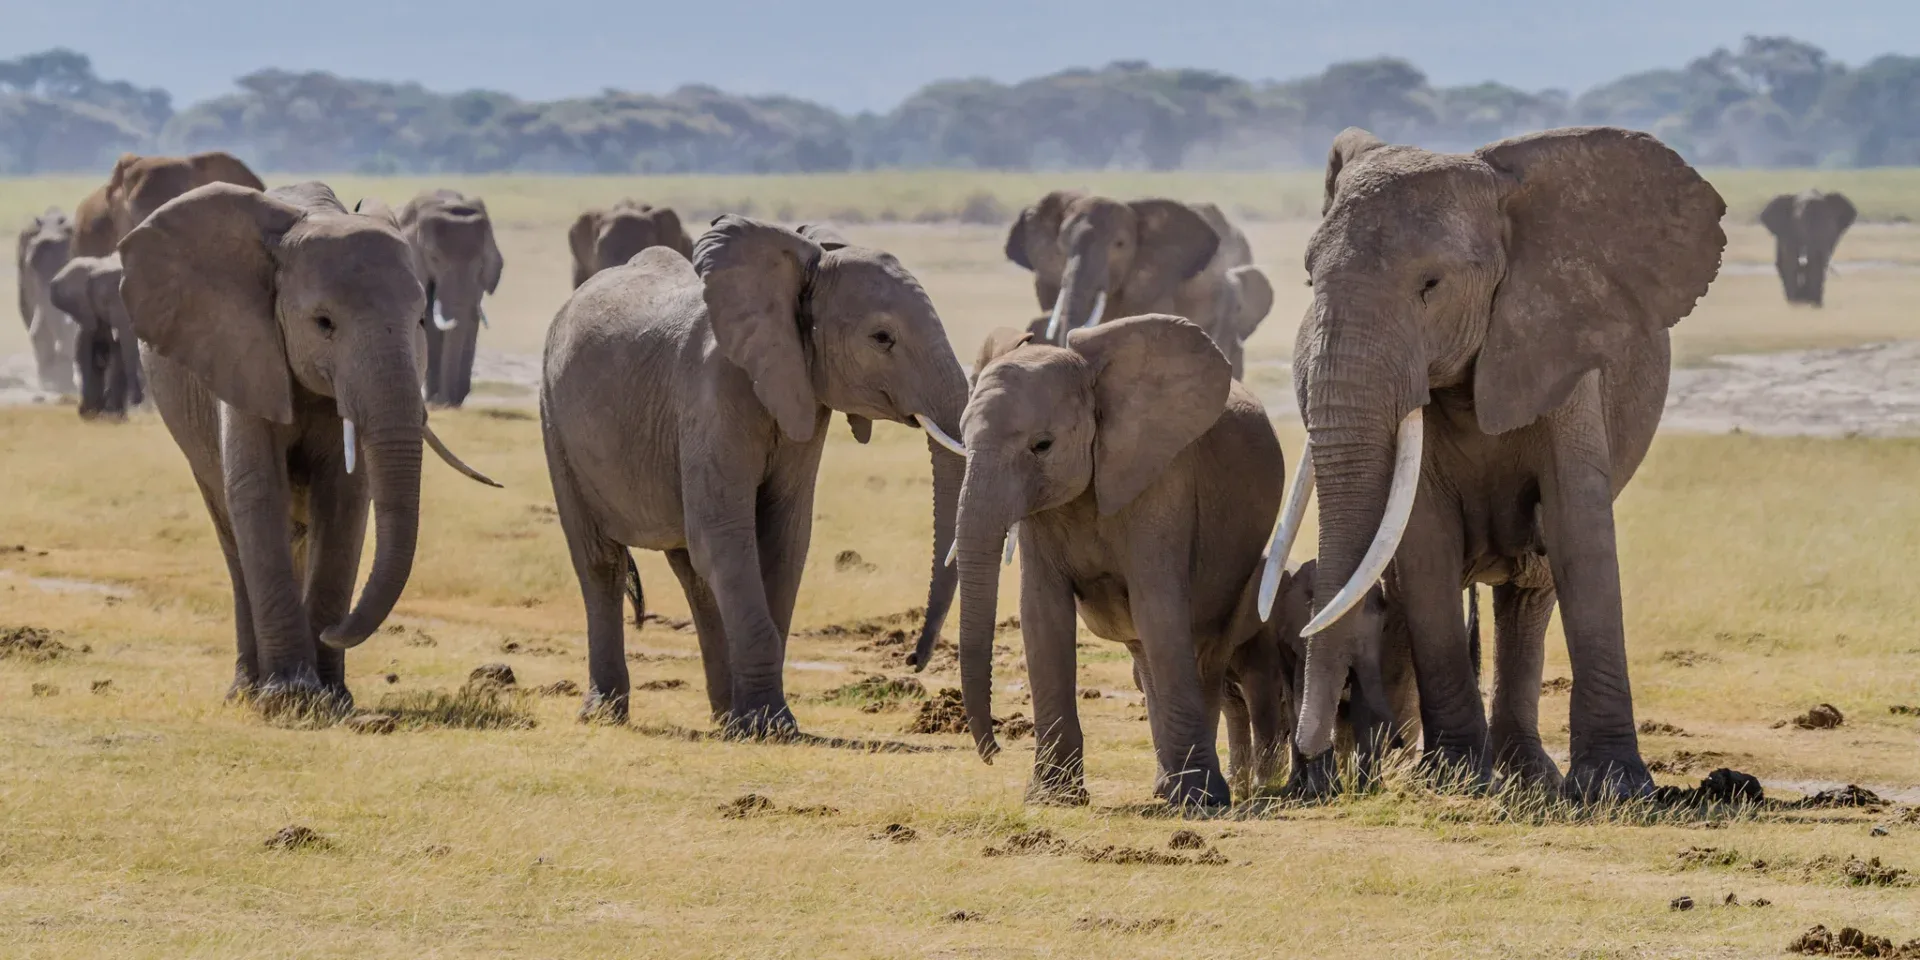 Where to See Elephants in Africa